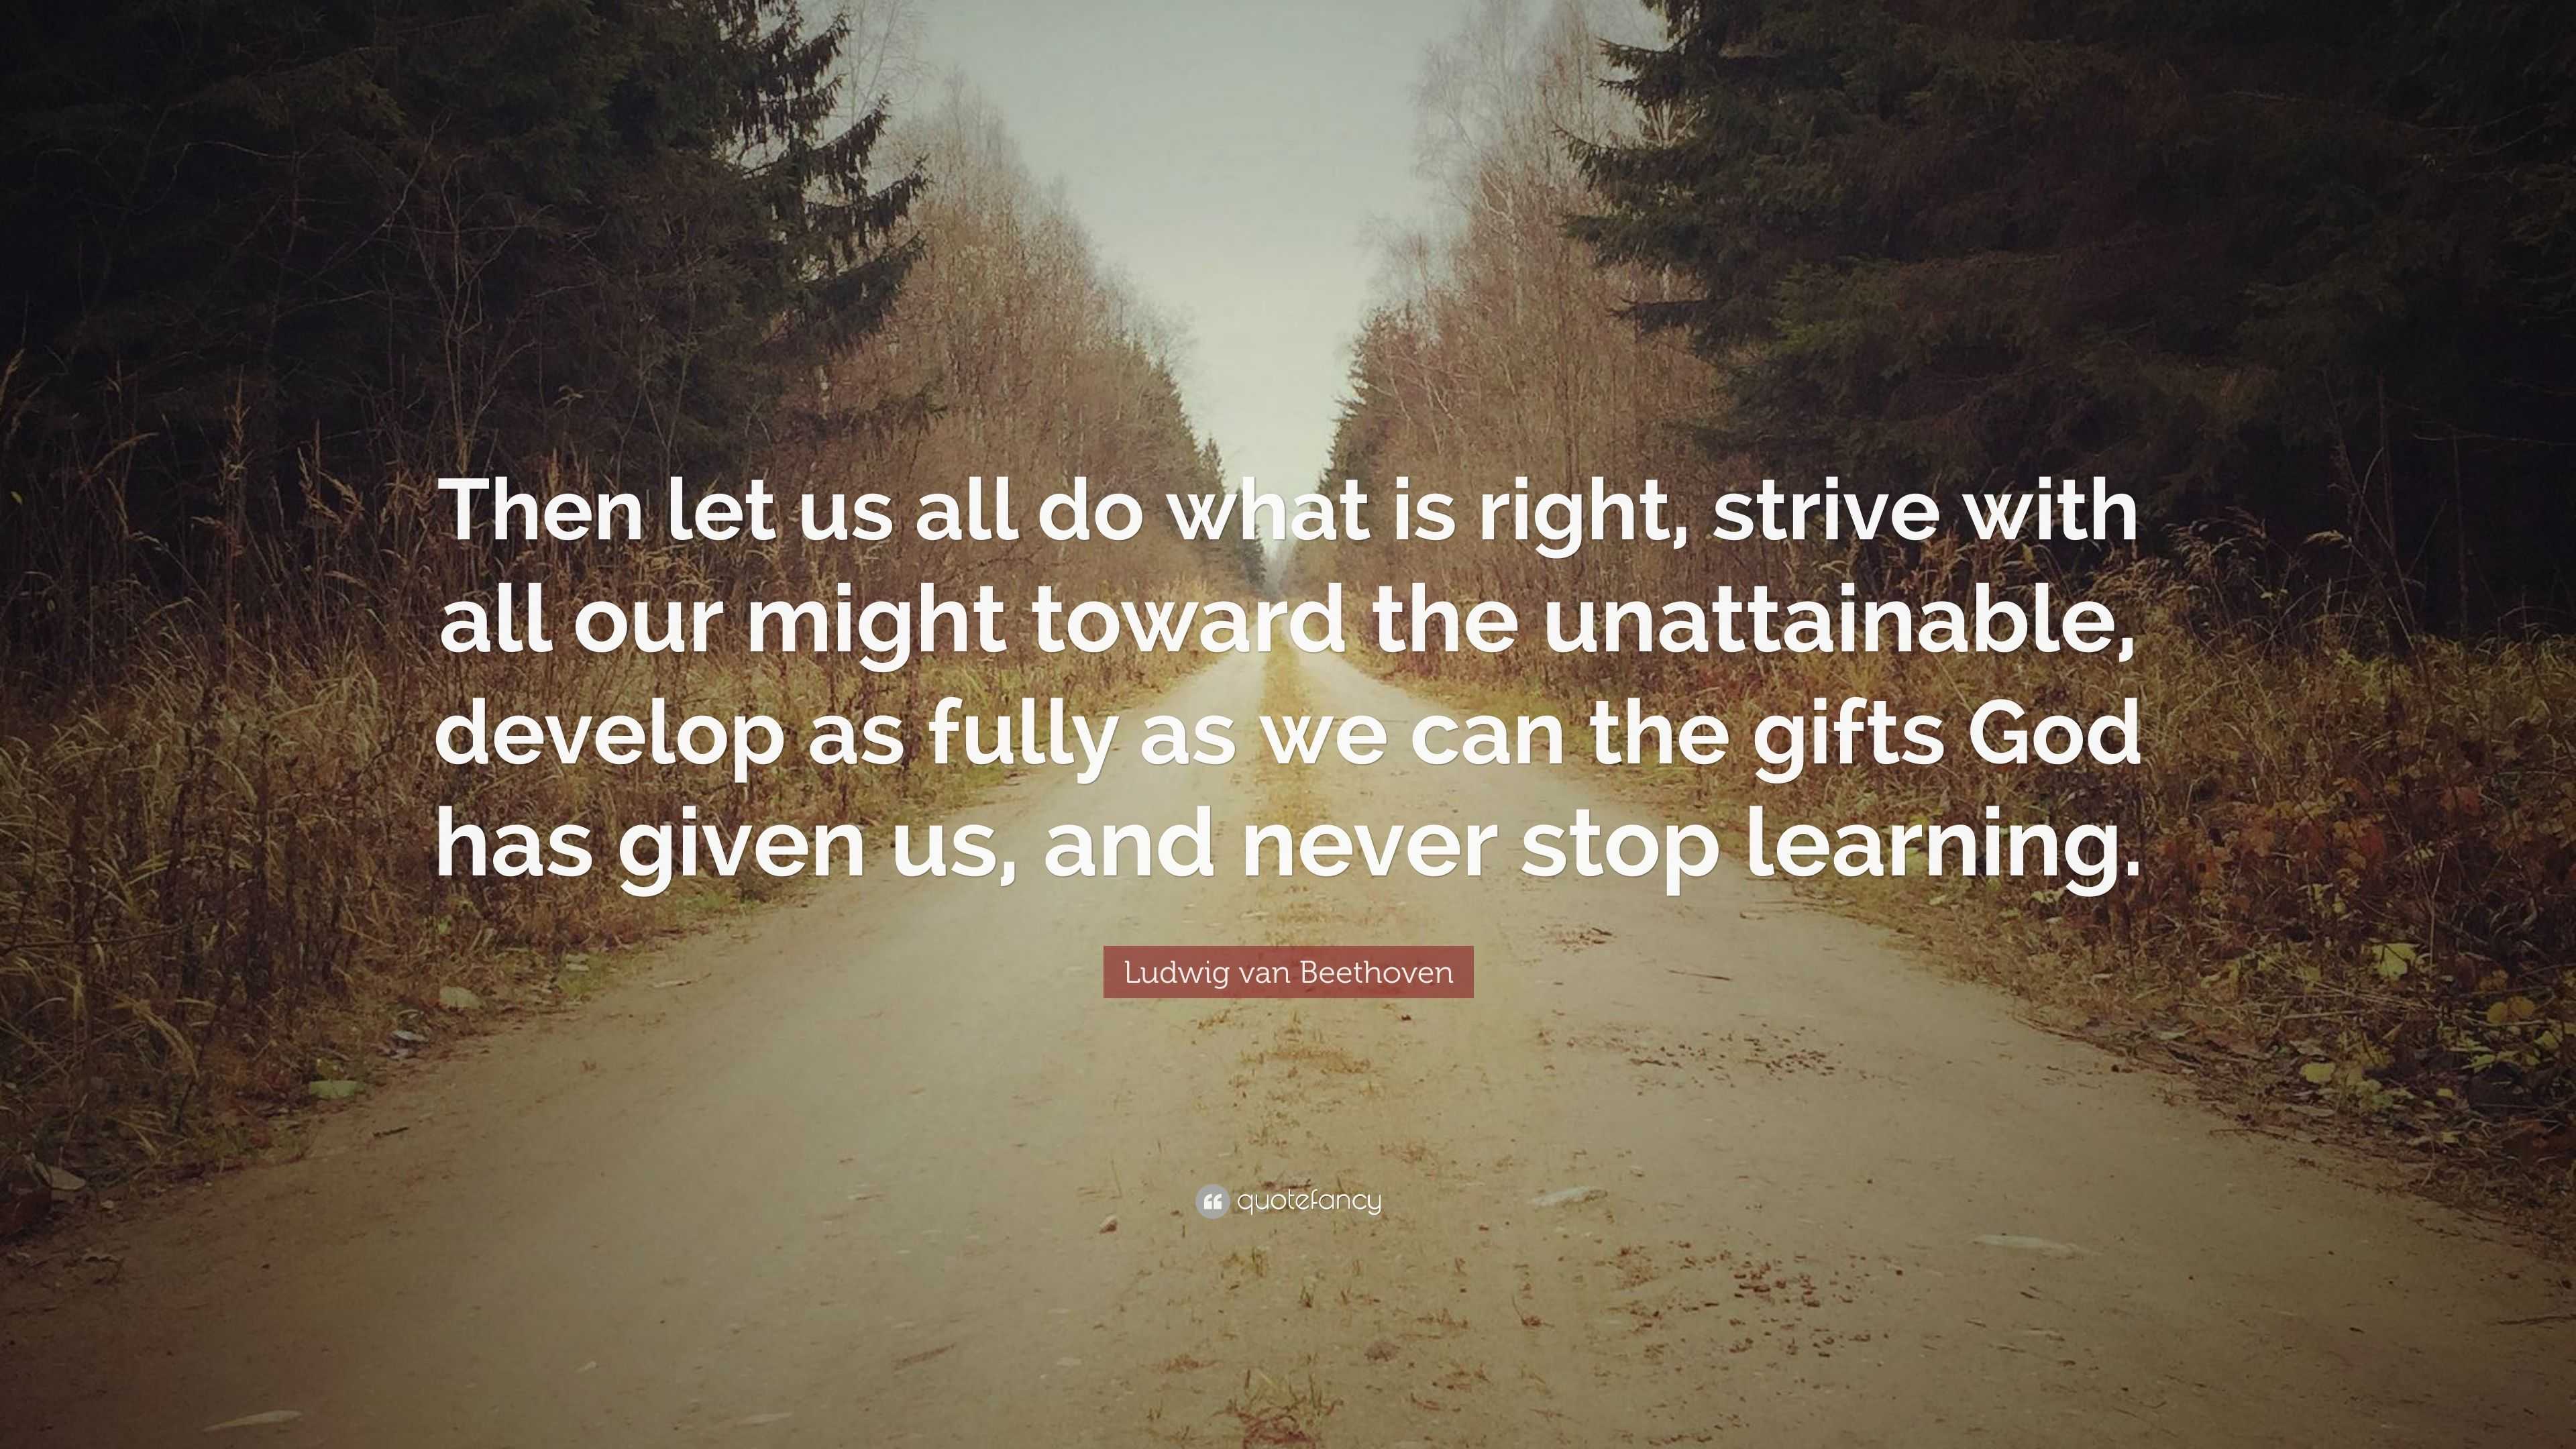 Ludwig van Beethoven Quote: “Then let us all do what is right, strive ...